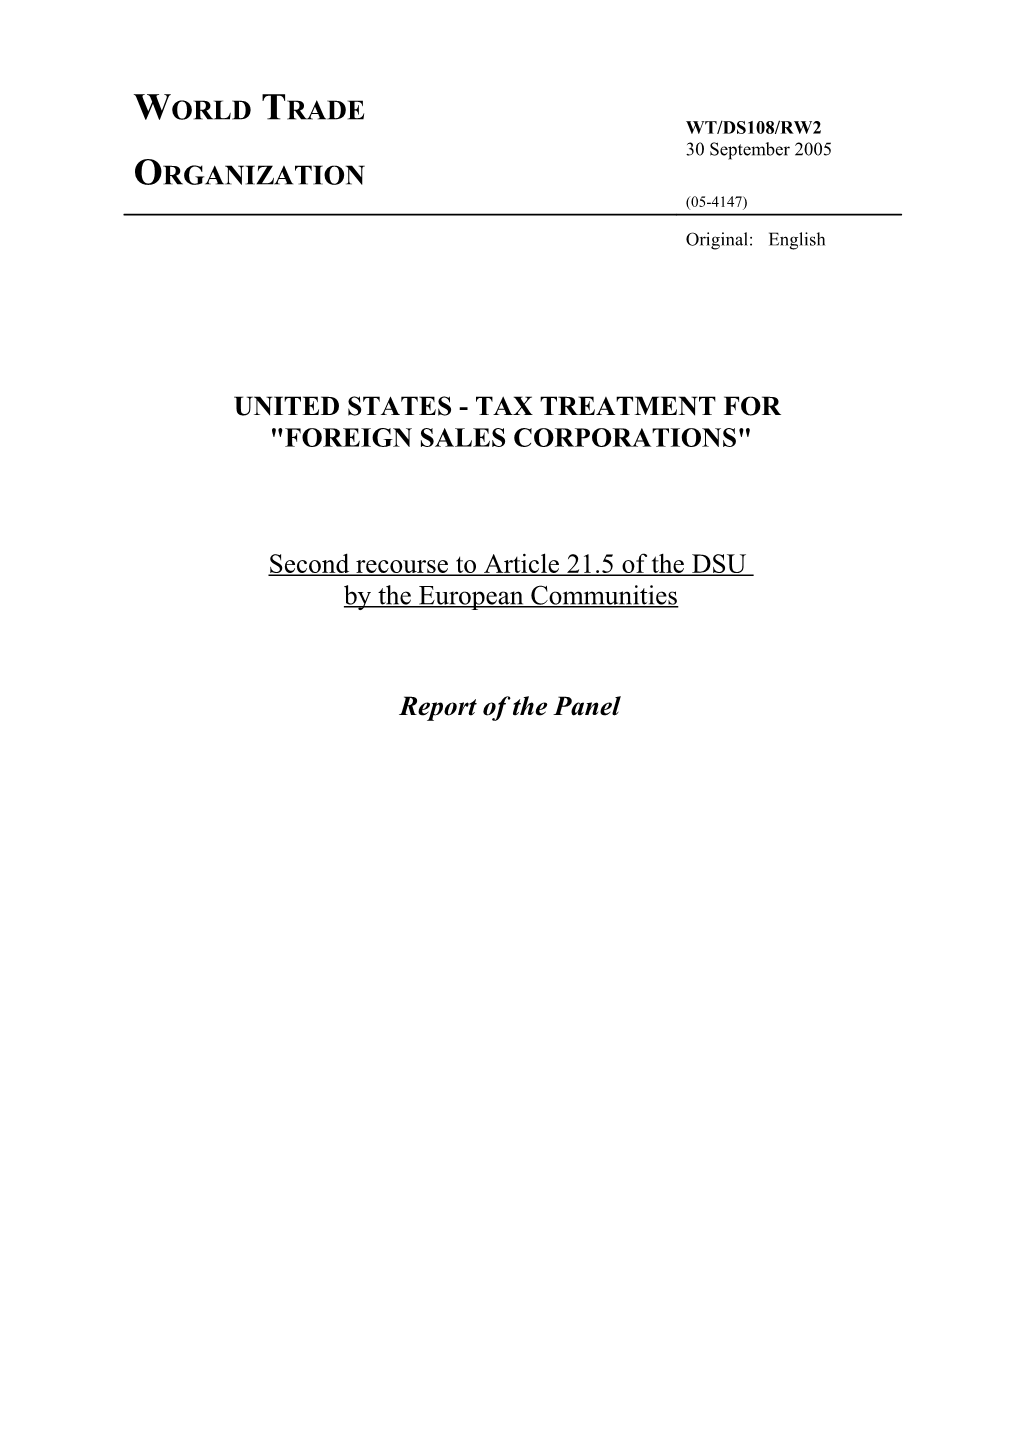 United States - Tax Treatment For